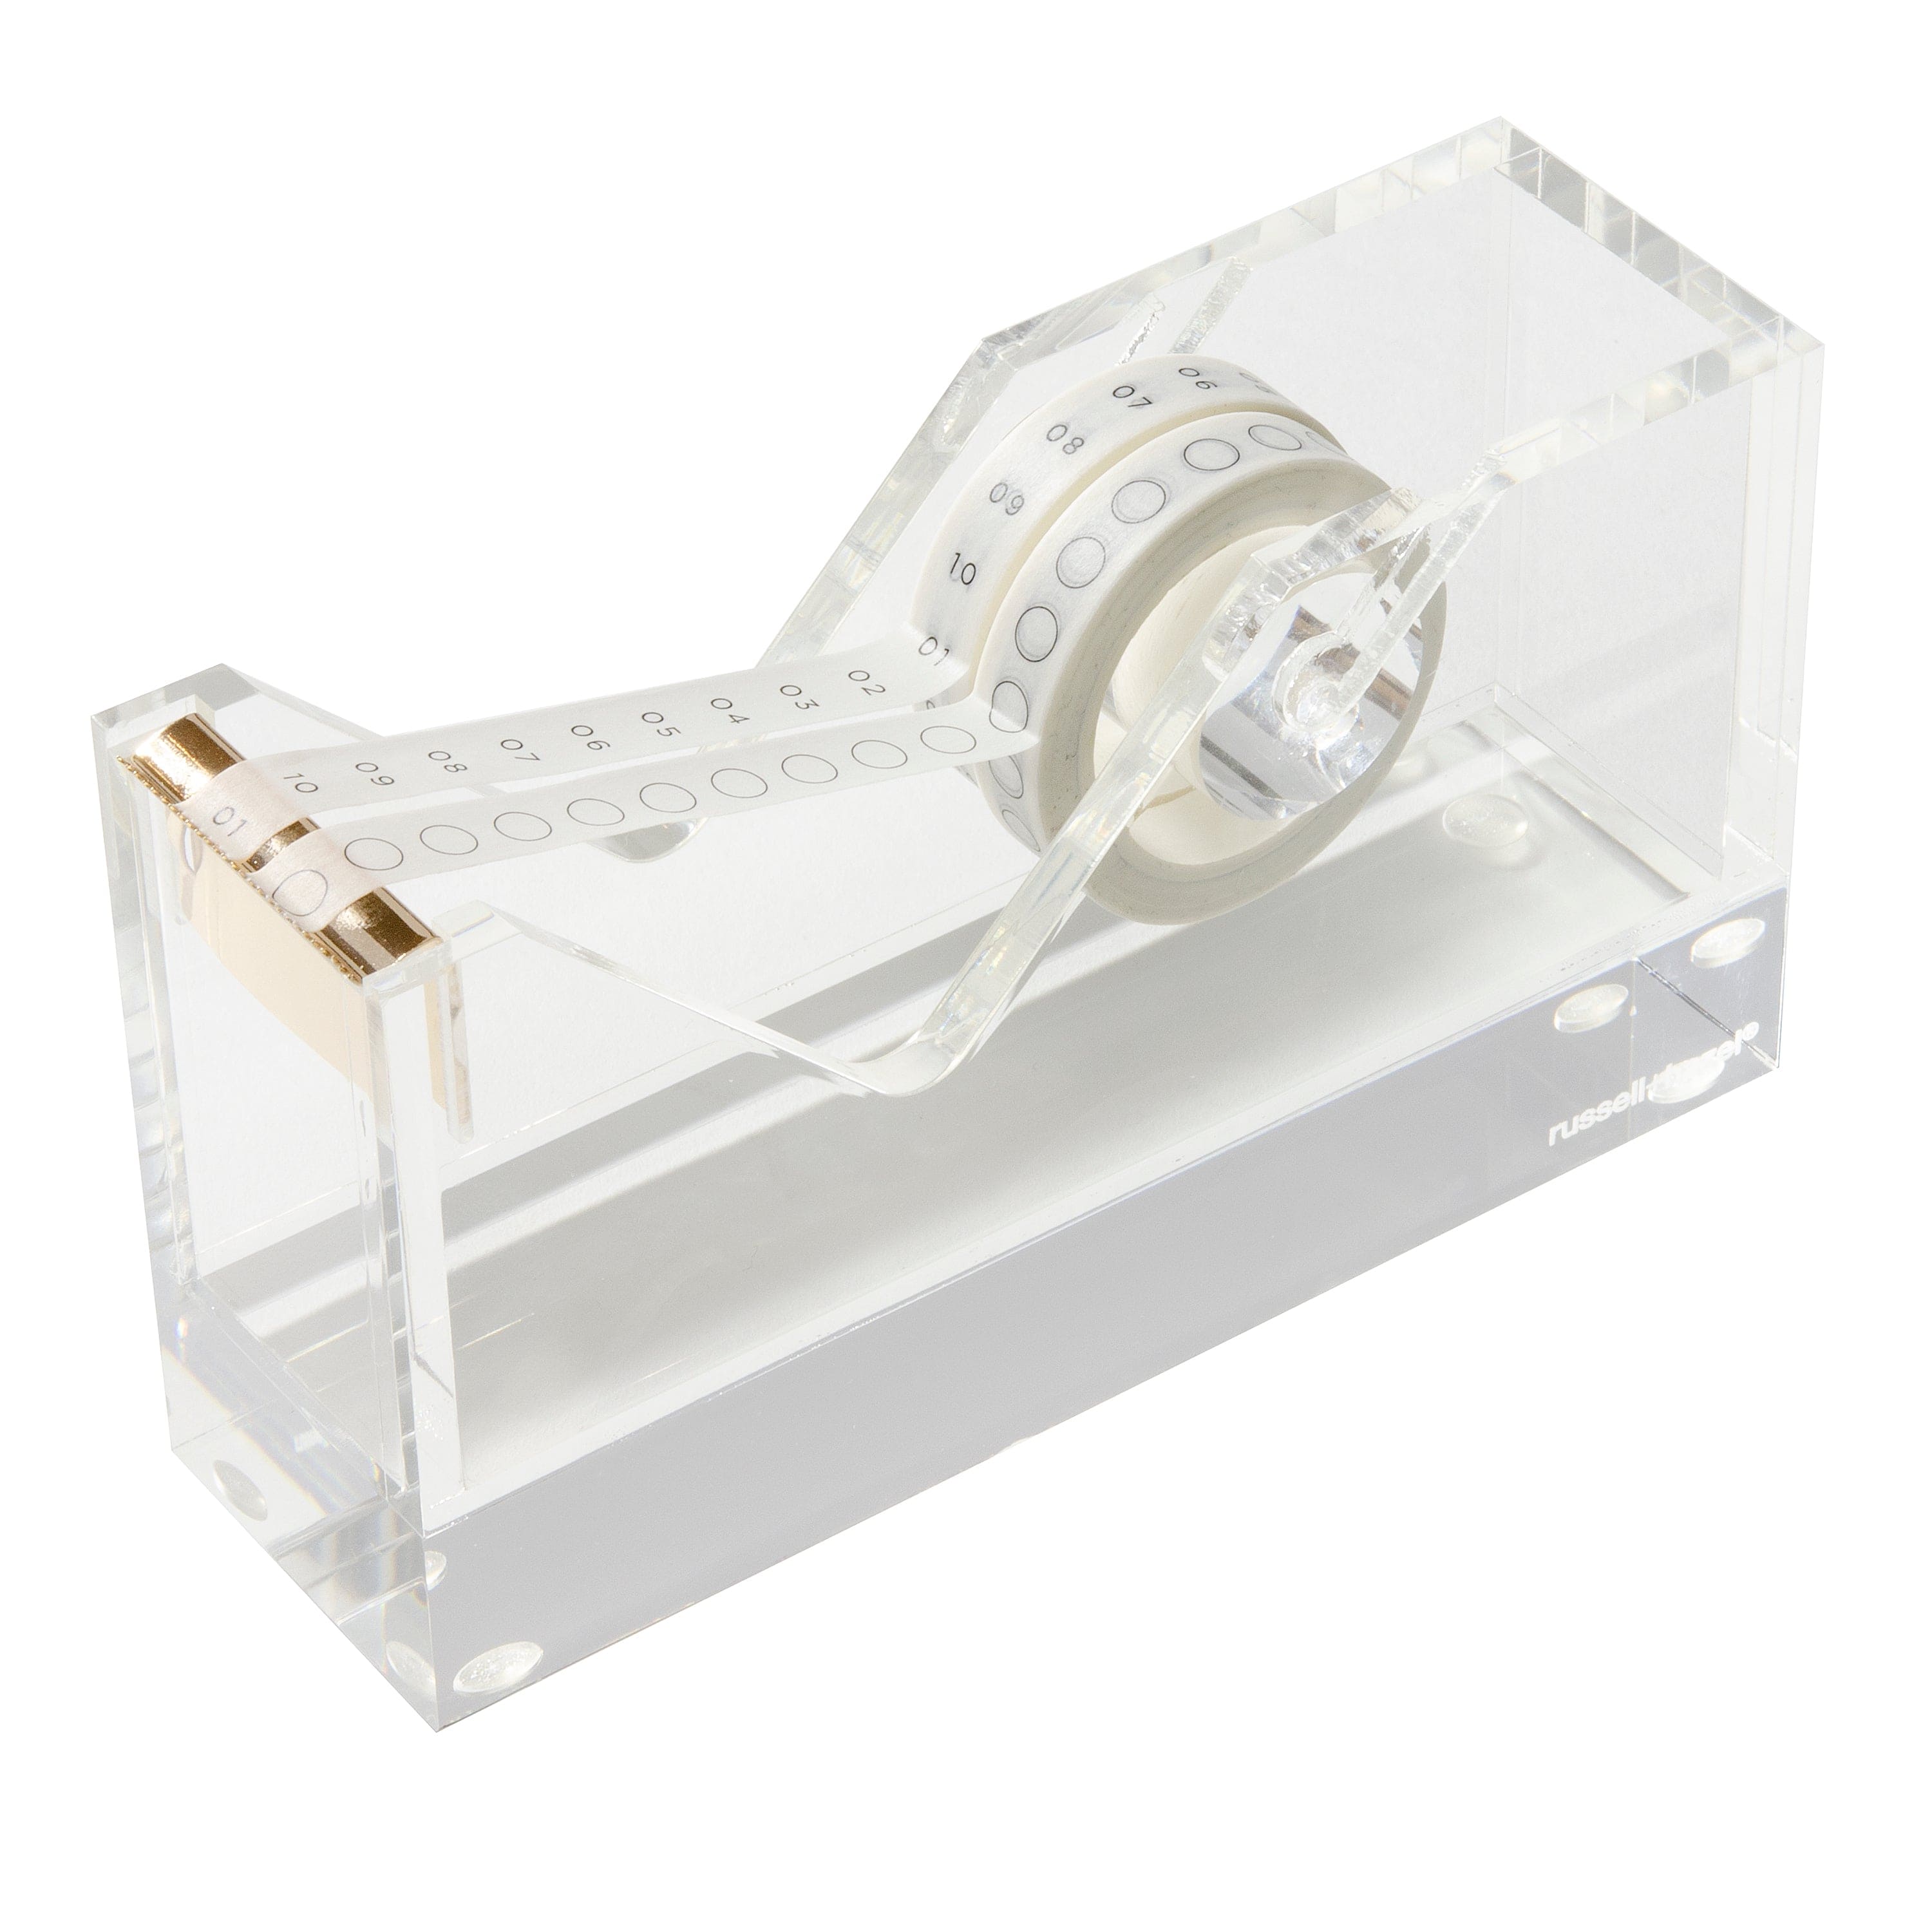 Clear Acrylic Desktop Tape Dispenser, 6 x 3.375 x 1.8125, with Gold Tone  Hardware (31734)